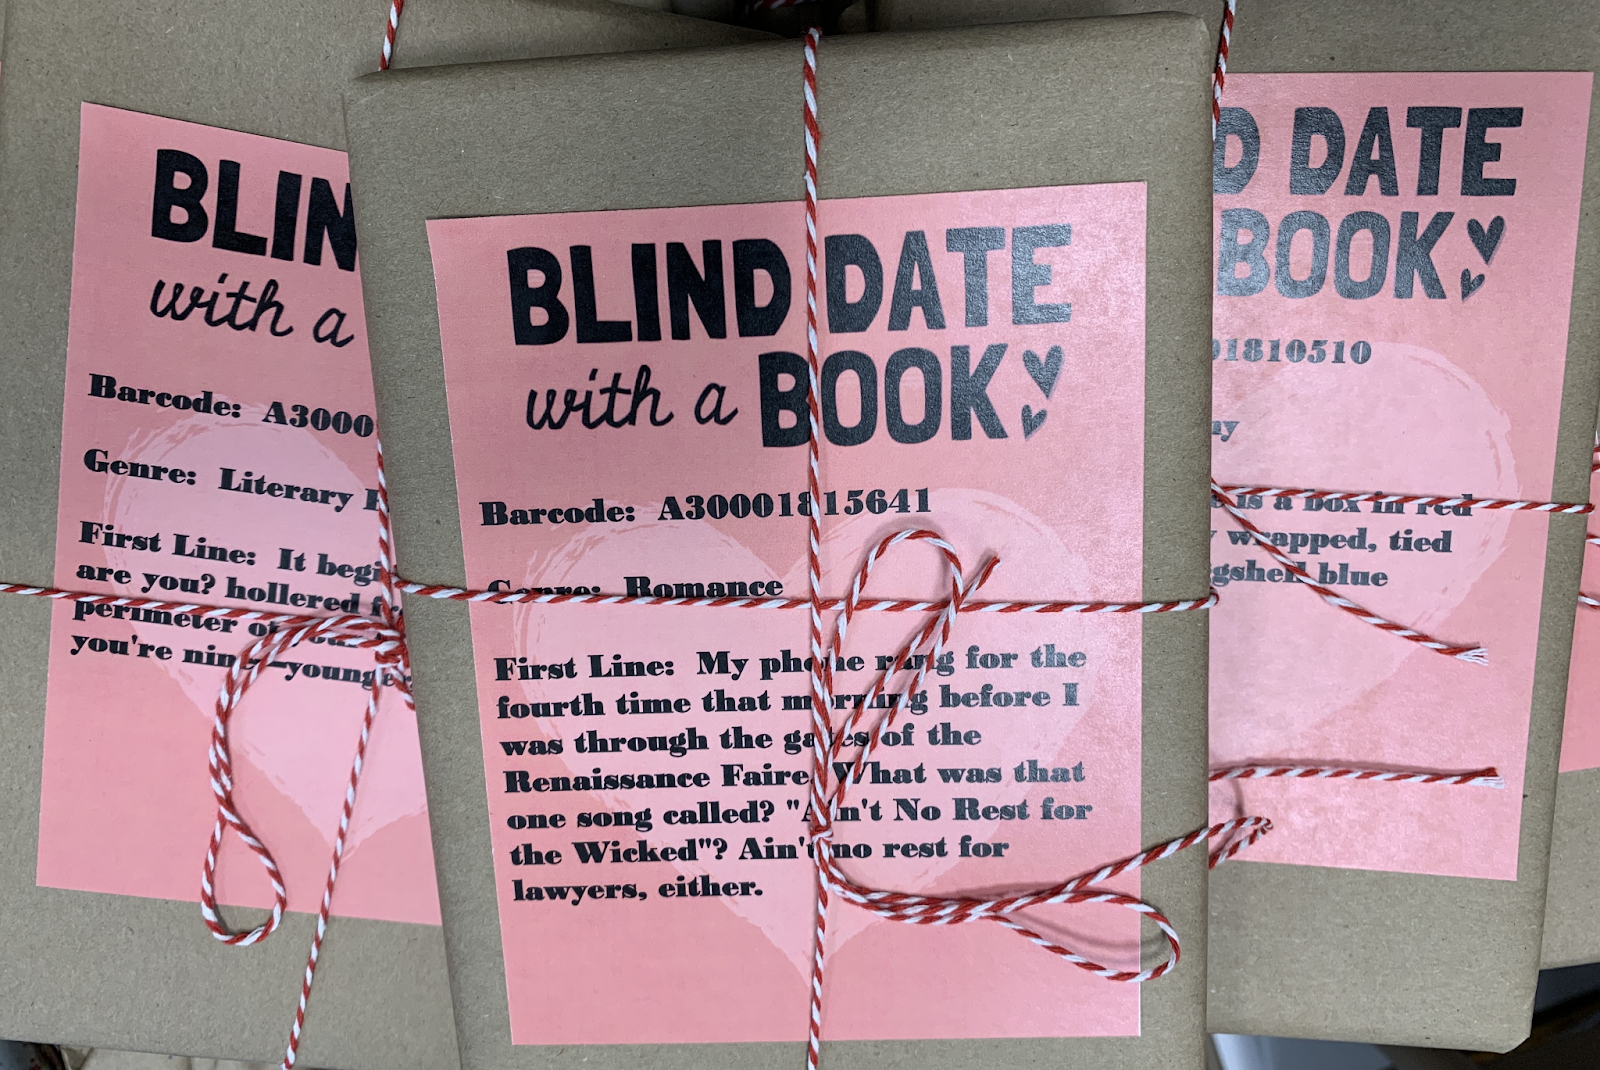 Blind Date with a Book - image with books wrapped up with graphic and first line.